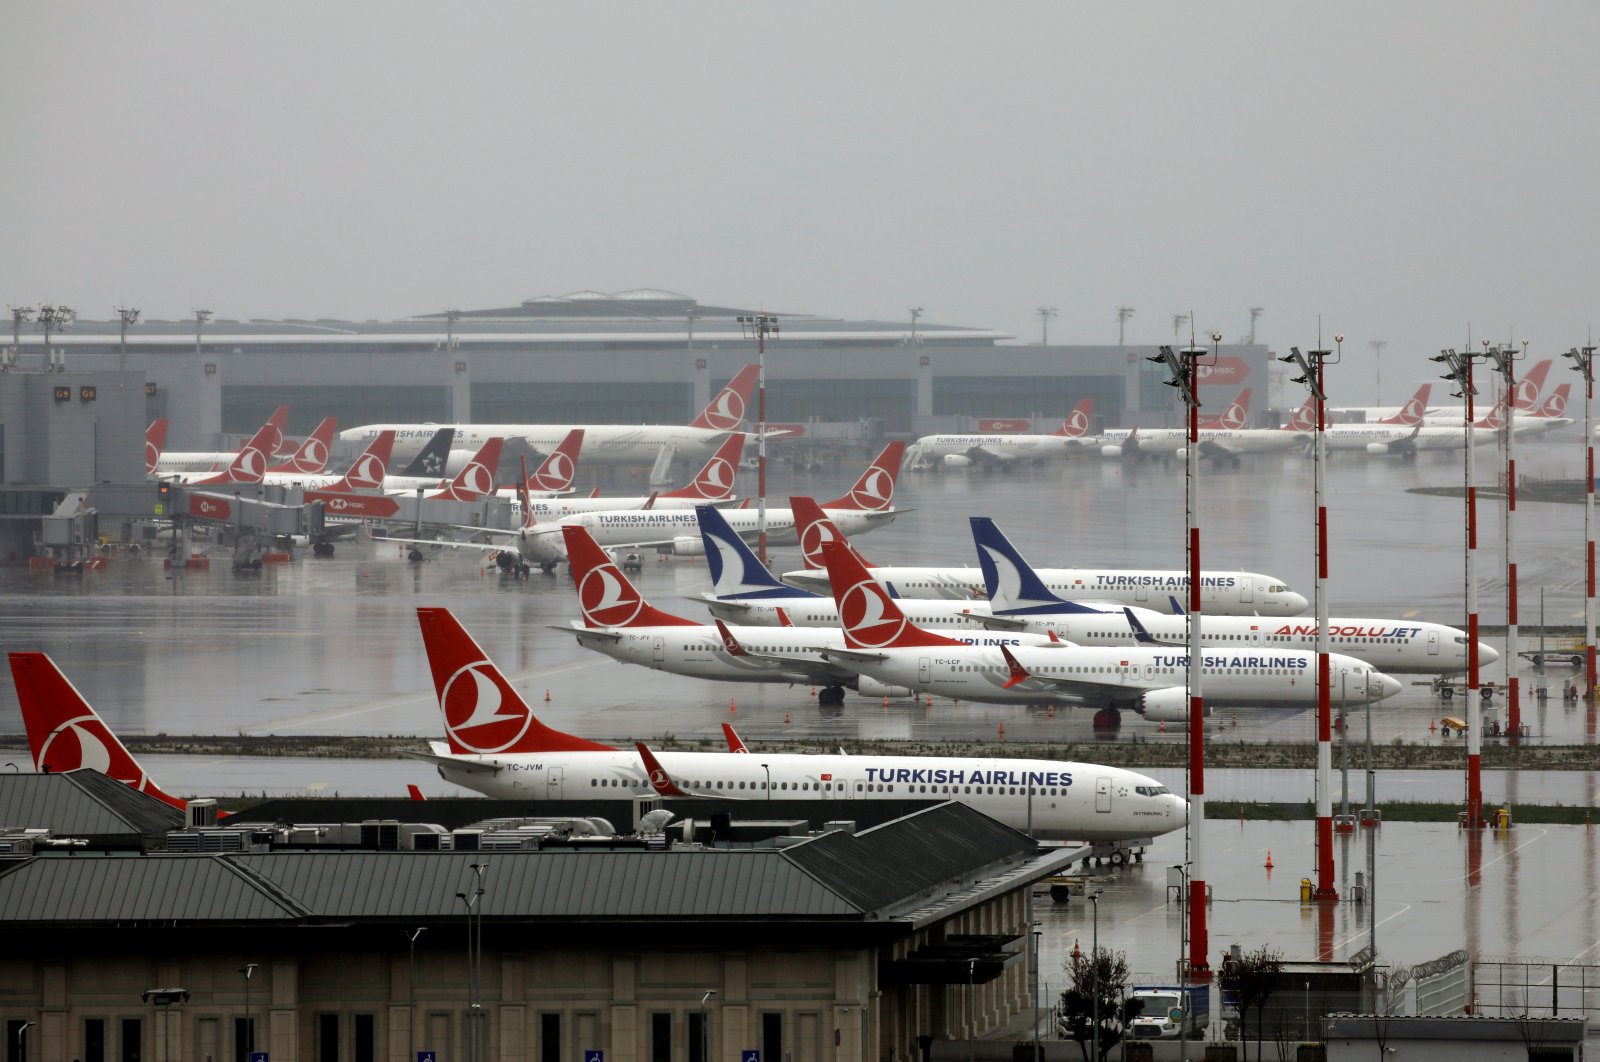 Airplanes of Turkish Airlines sit on a tarmac, during the outbreak of the coronavirus disease (COVID-19), at Istanbul Airport, Turkey March 29, 2020. (Reuters Photo)